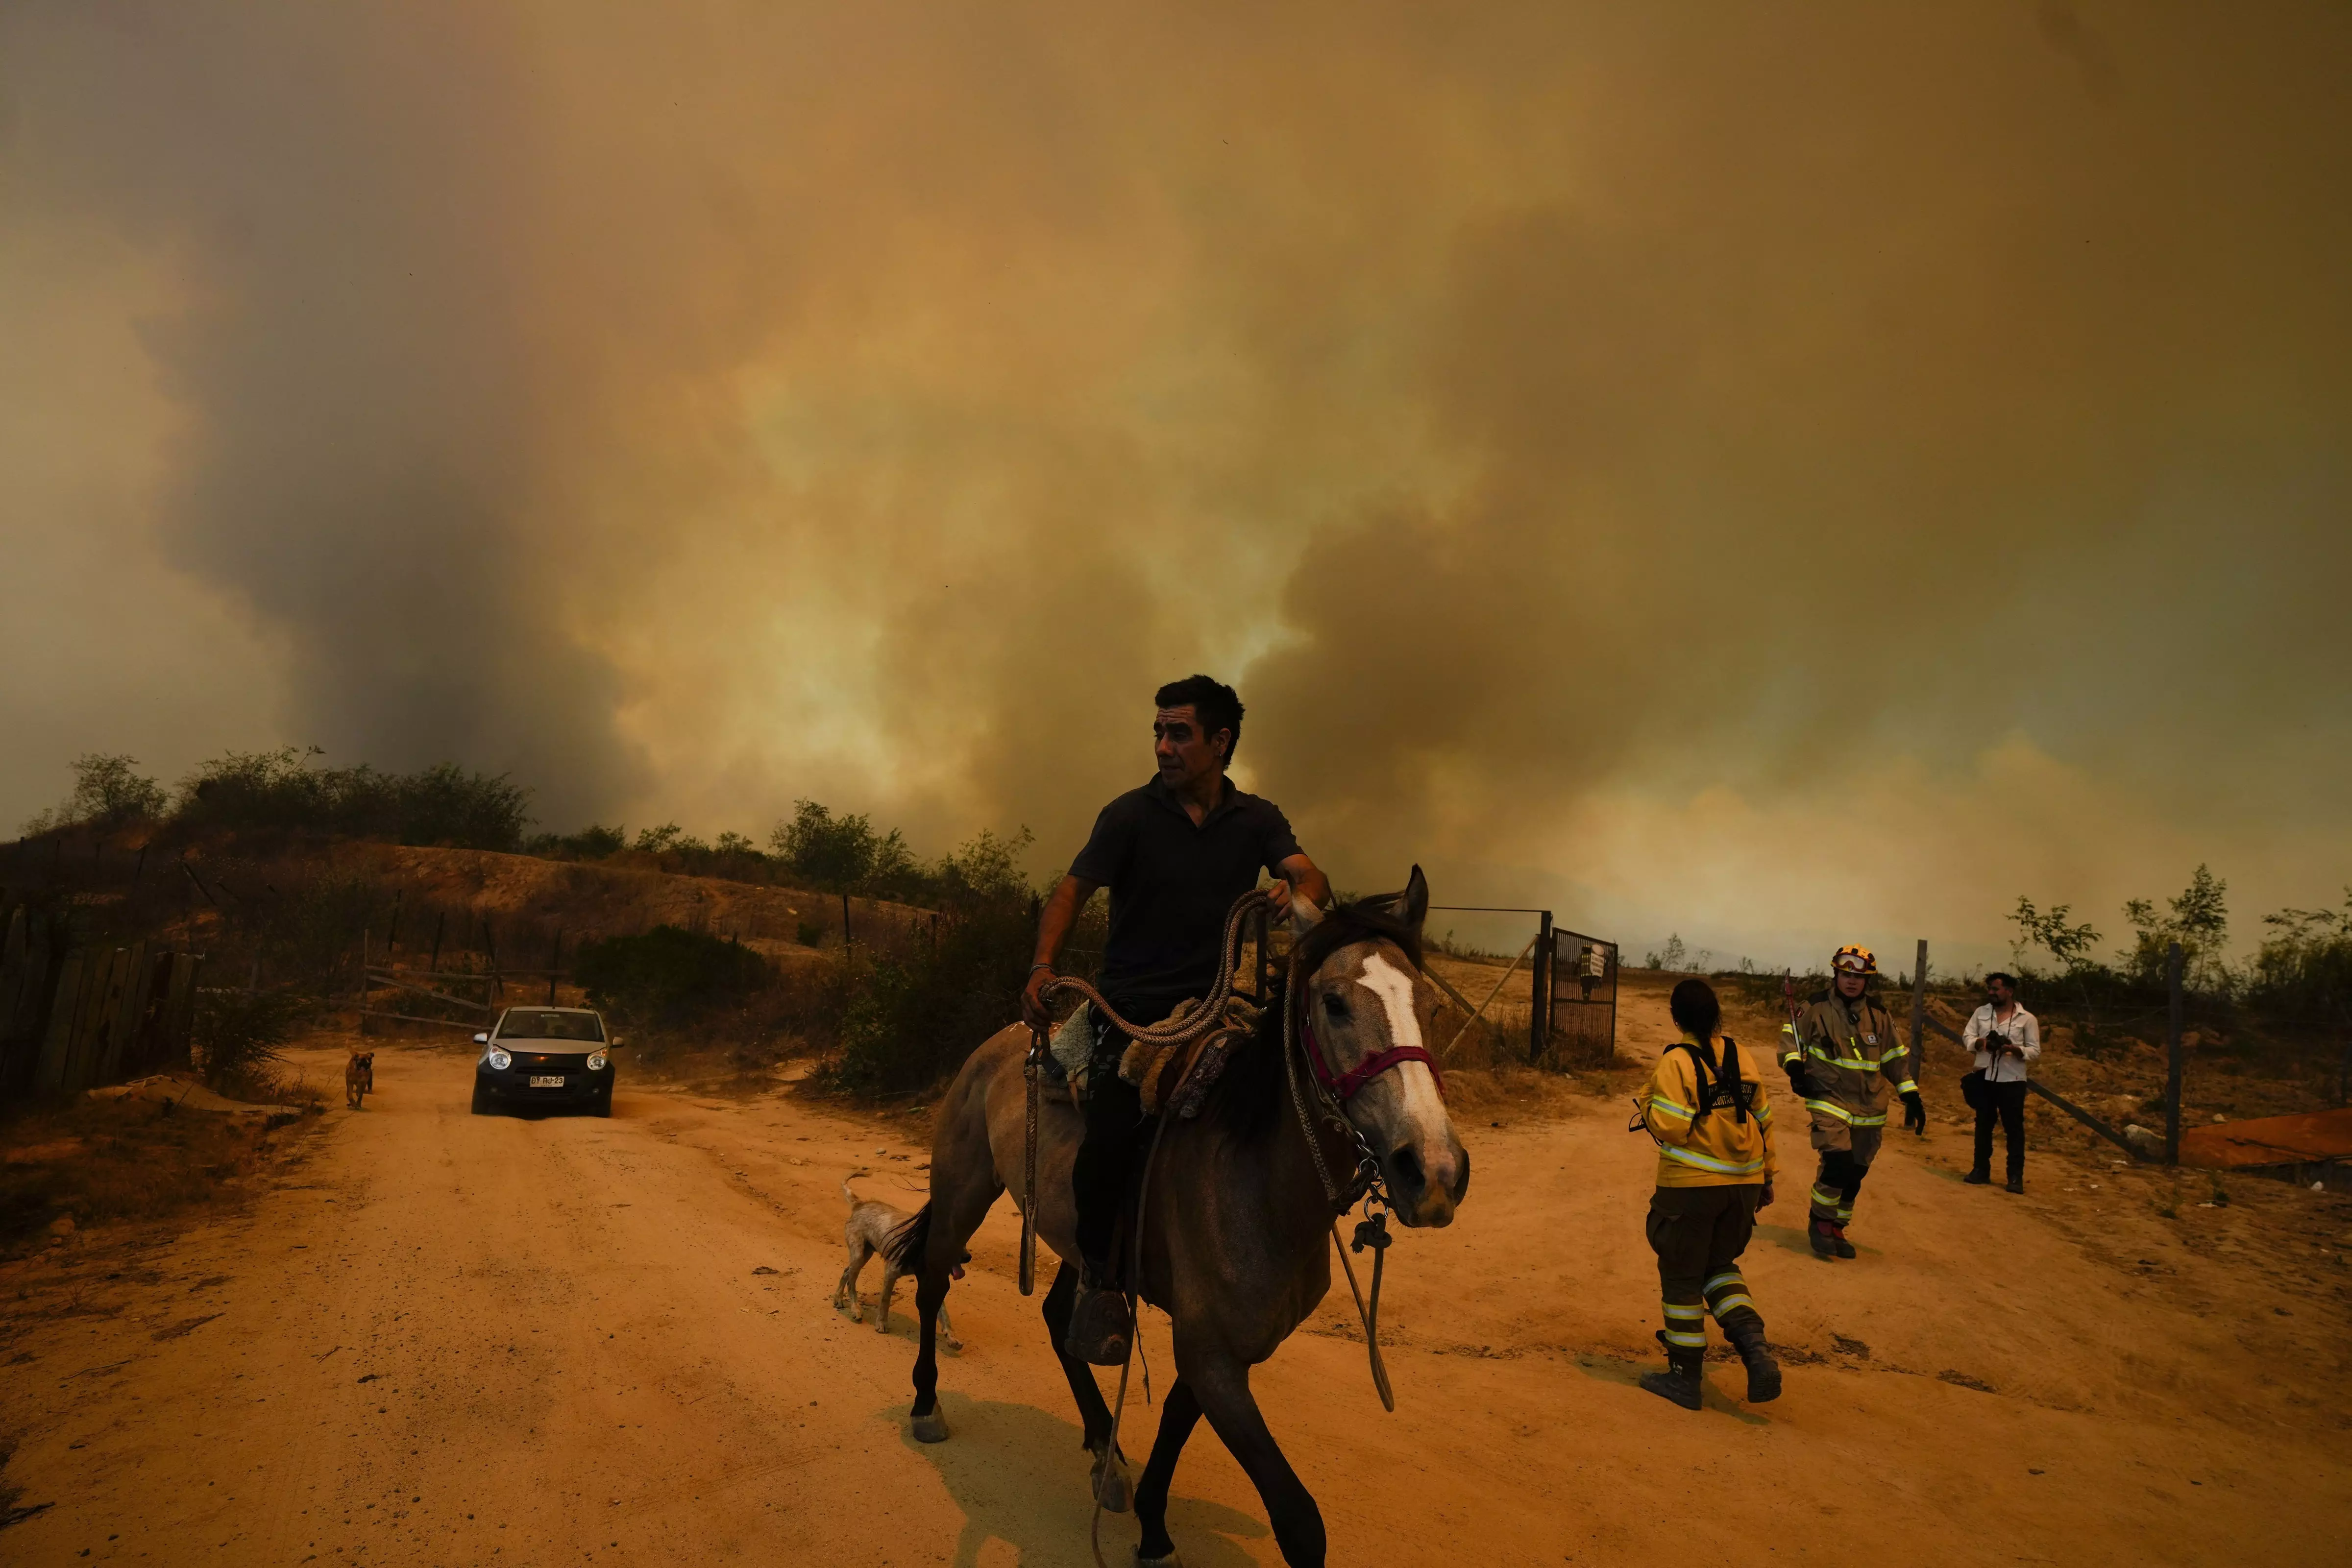 Forest fires rage on in central Chile, killing at least 112 people over 3 days